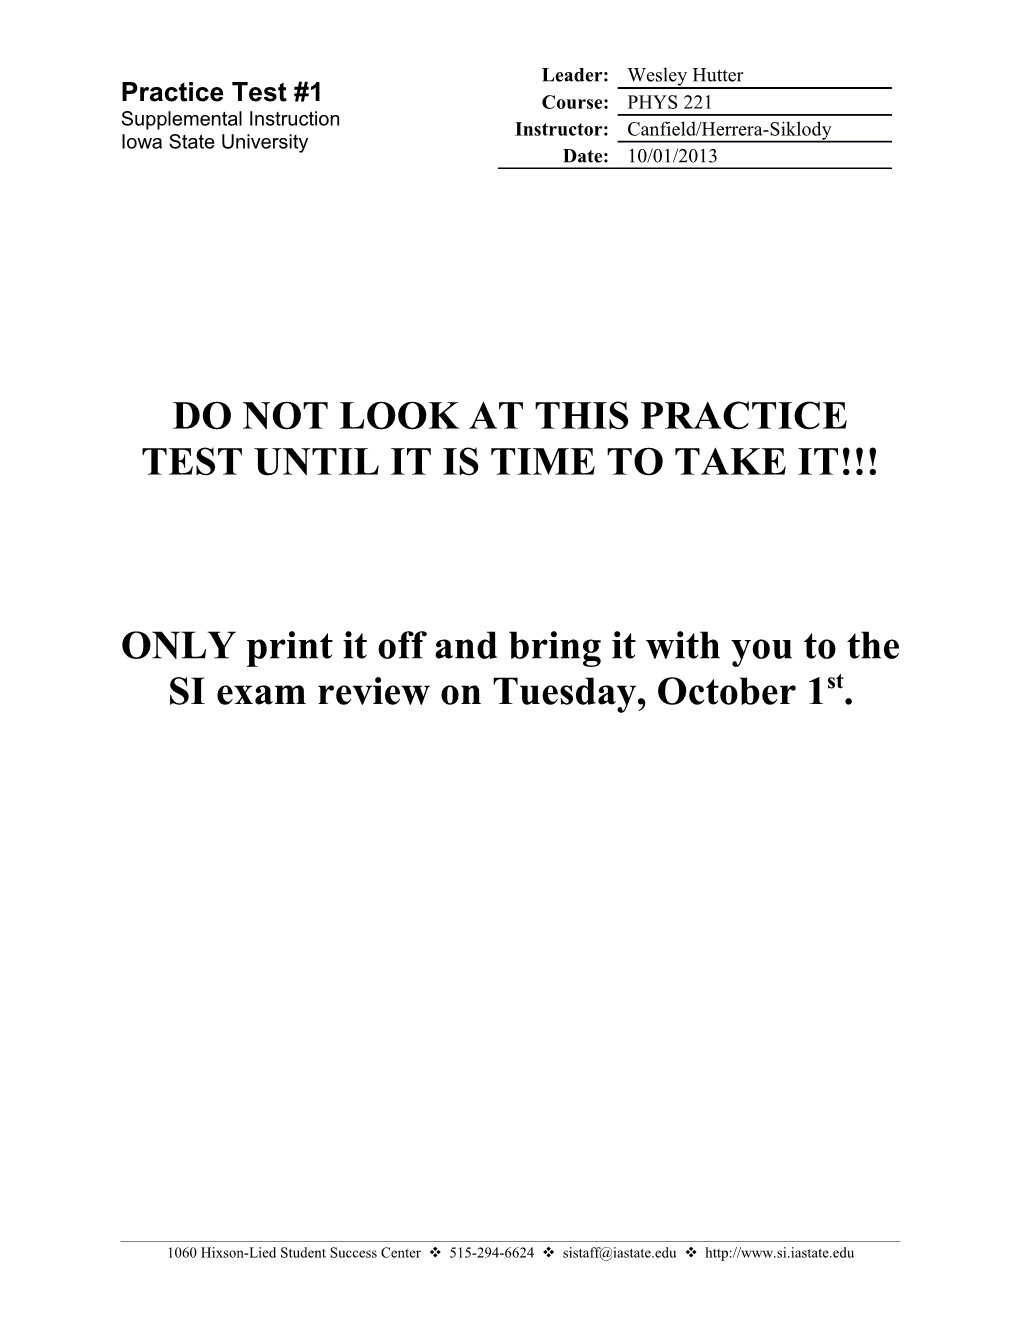 Do Not Look at This Practice Test Until It Is Time to Take It